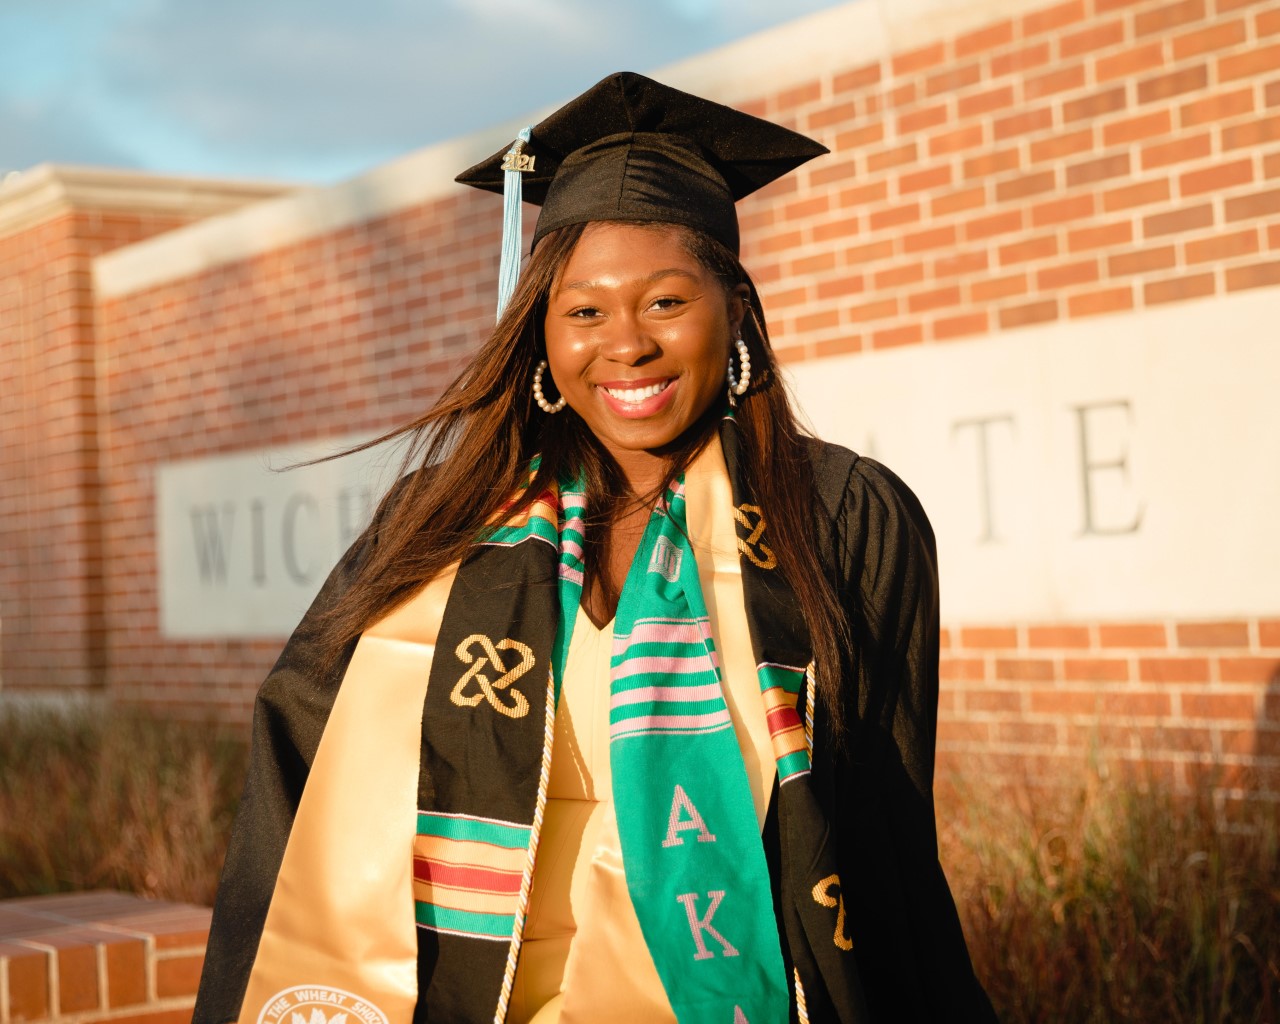 Black woman in graduation cap and gown with honors